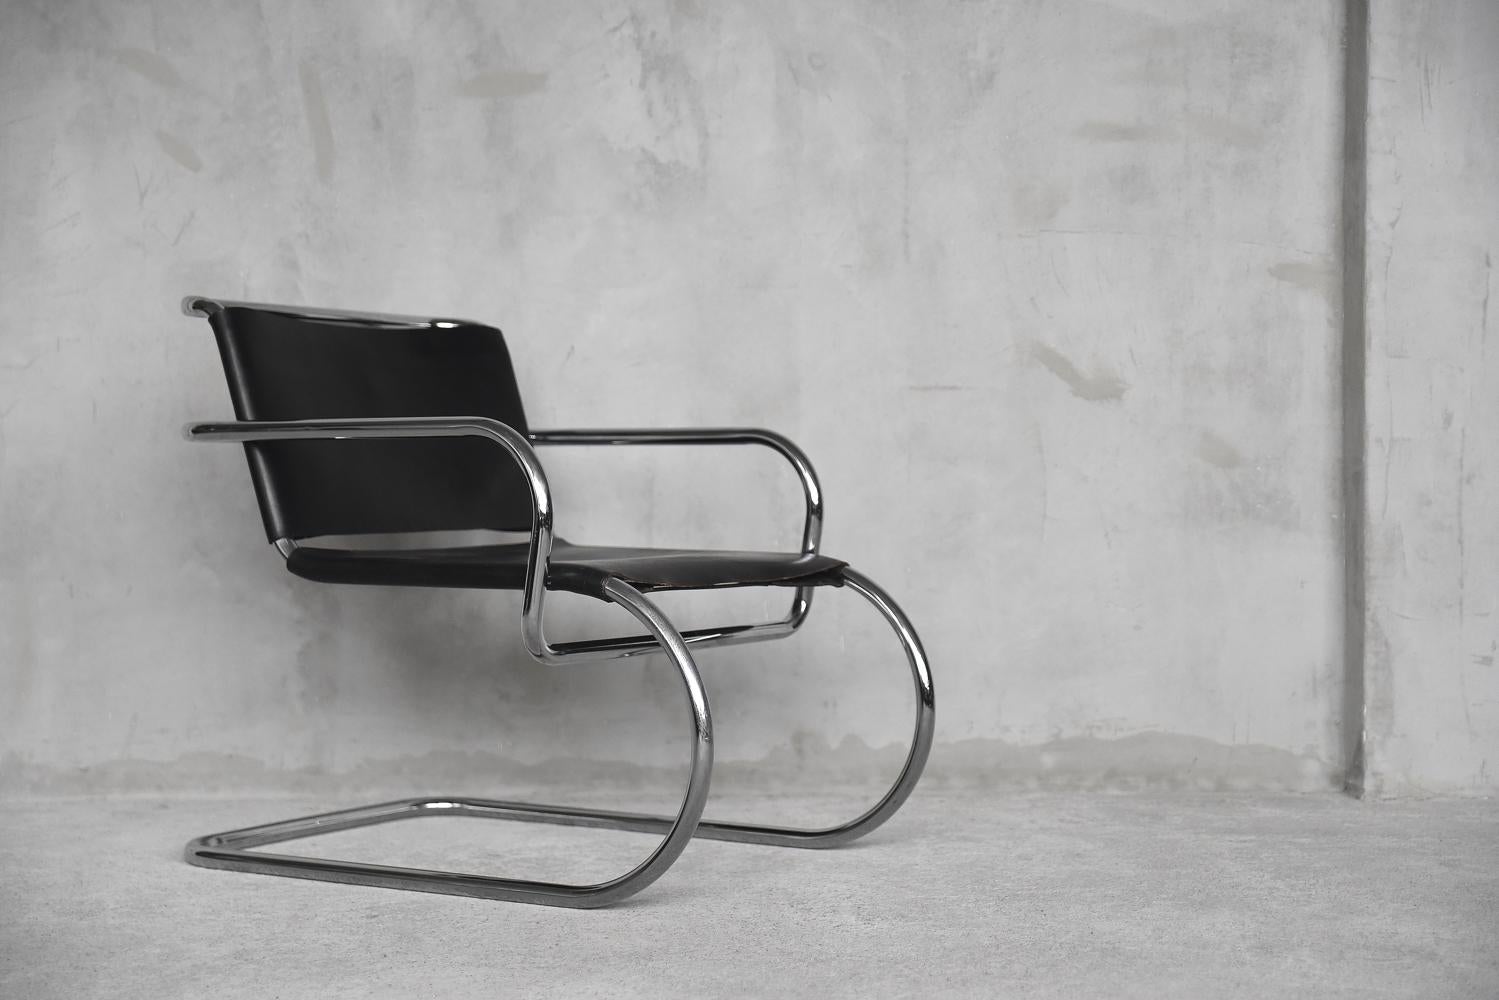 Vintage Rare Bauhaus German Leather Armchair by Franco Albini for Tecta, 1950s For Sale 6